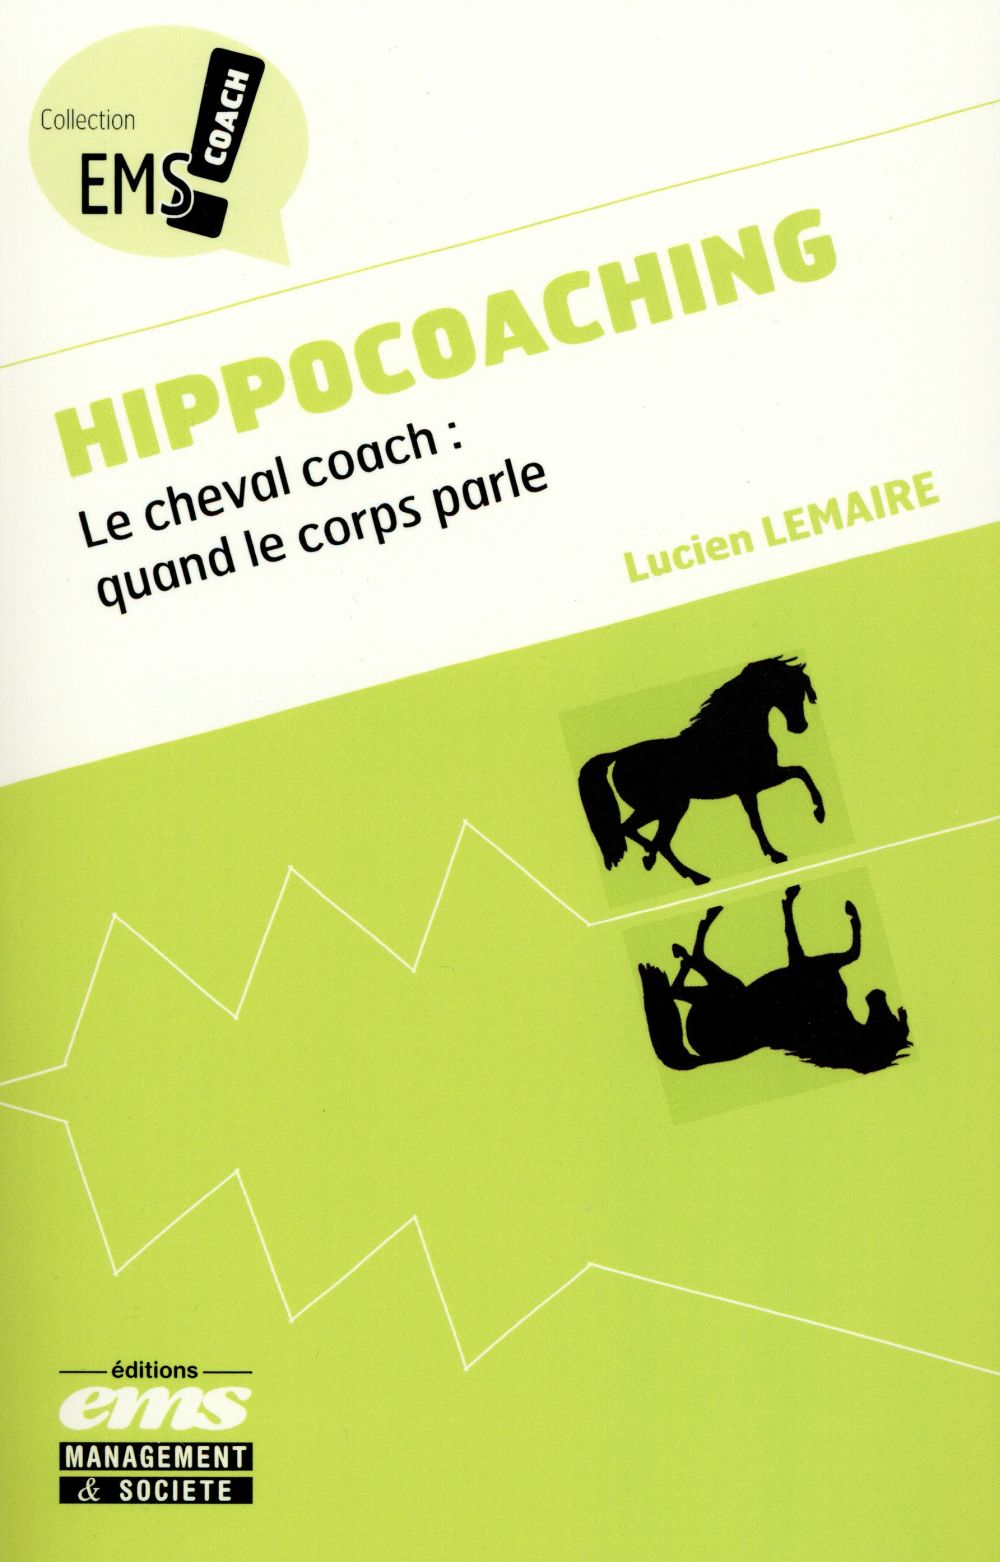 HIPPOCOACHING - LE CHEVAL COACH : QUAND LE CORPS PARLE.